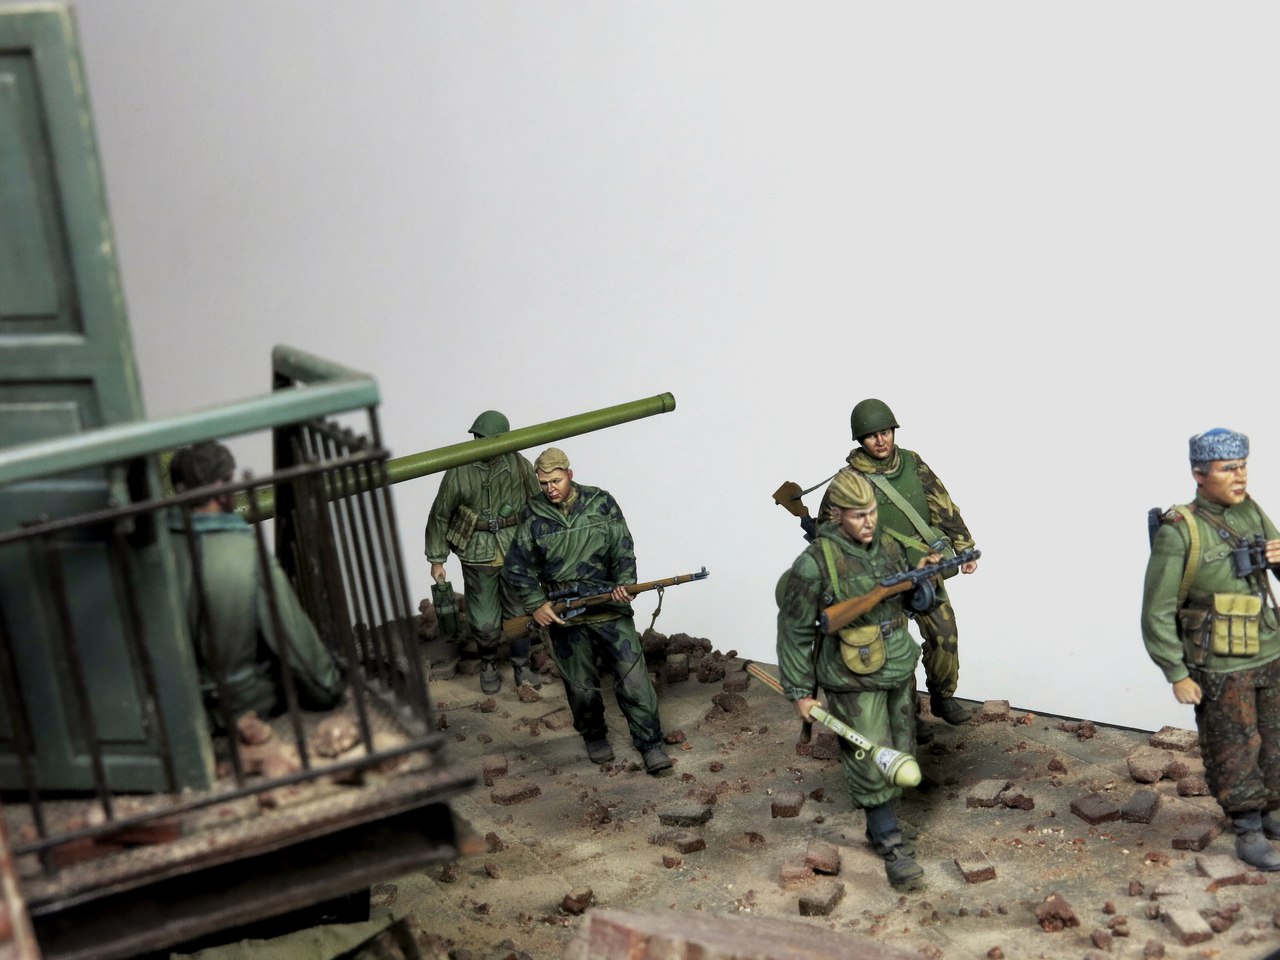 Dioramas and Vignettes: Tragoedia in finem, photo #11